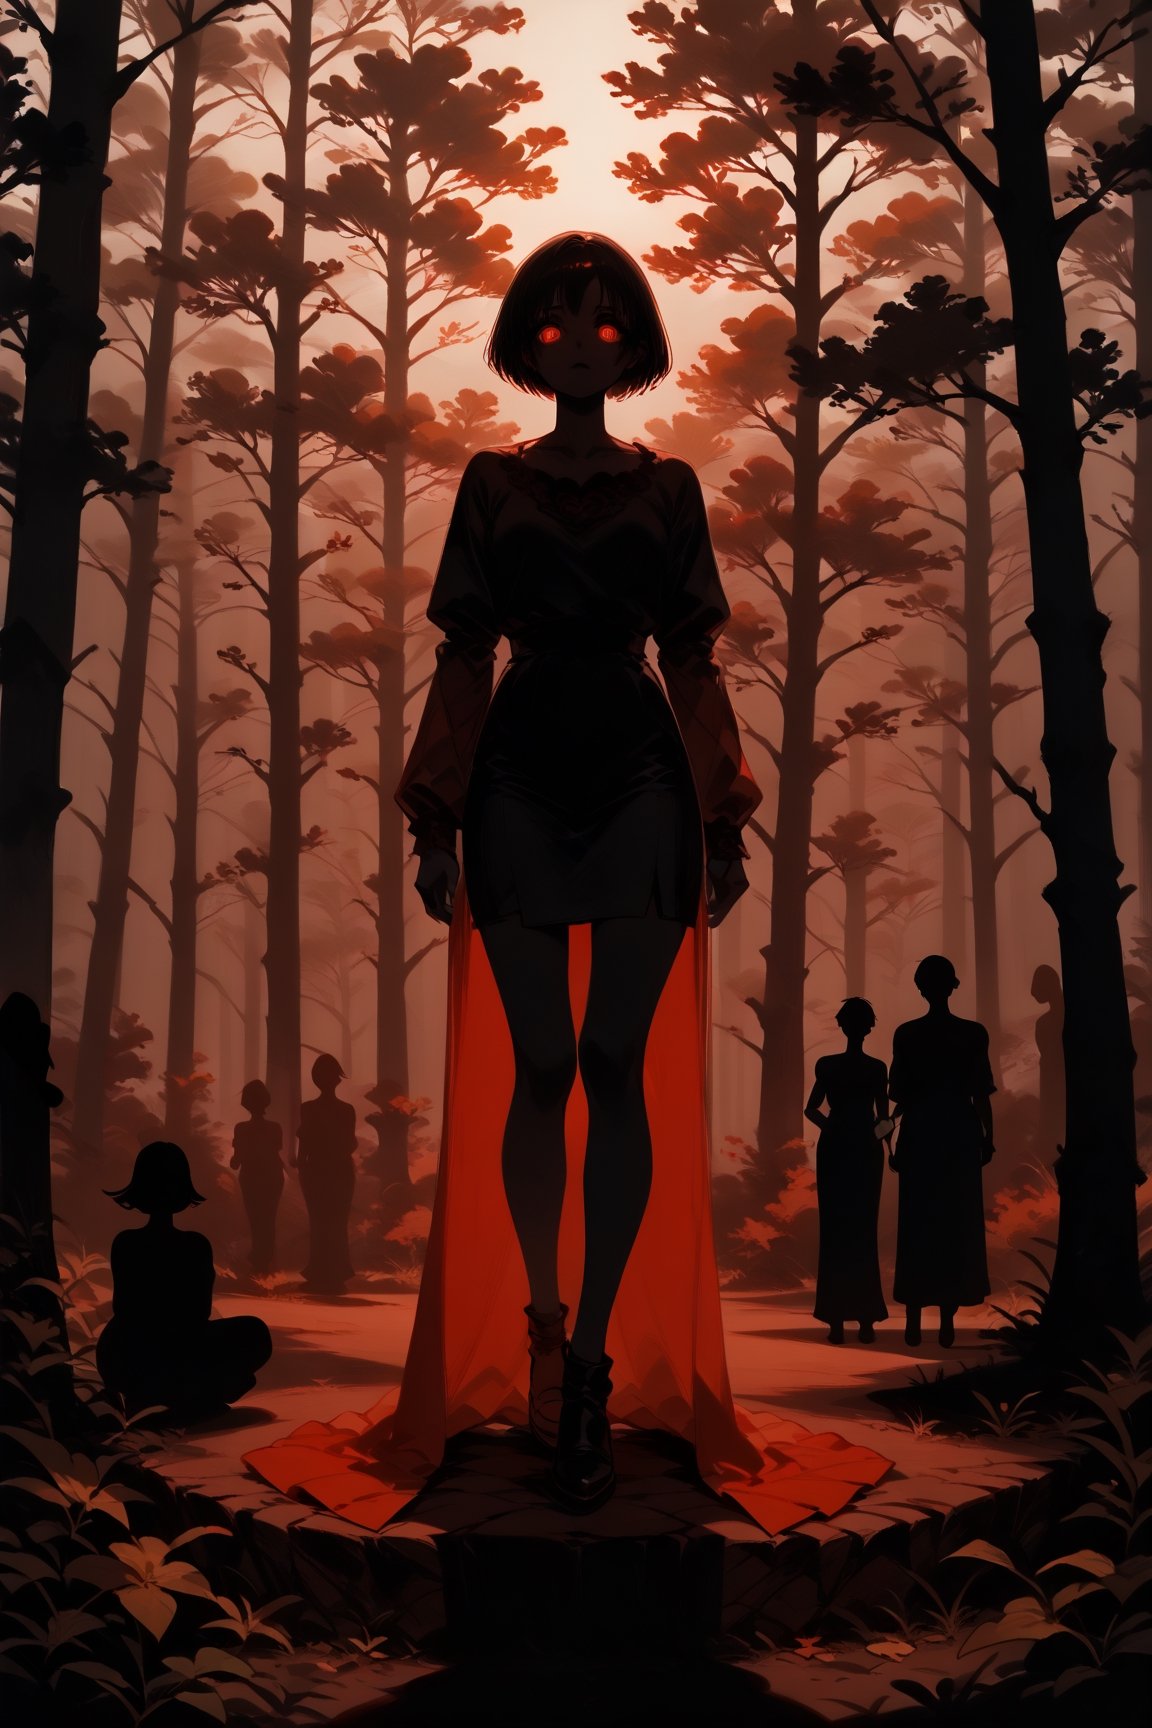 SCORE_9, SCORE_8_UP, SCORE_7_UP, SCORE_6_UP,

BEST QUALITY, HIGHRES, ABSURDRES,
MASTERPIECE, VERY AESTHETIC, 
INTRICATE DETAILS, PERFECTEYES,

red theme, horror theme, forest background,
1girl, (silhouette:1.4), backlighting, glowing eyes, 
facing_viewer, full_body, shadows,